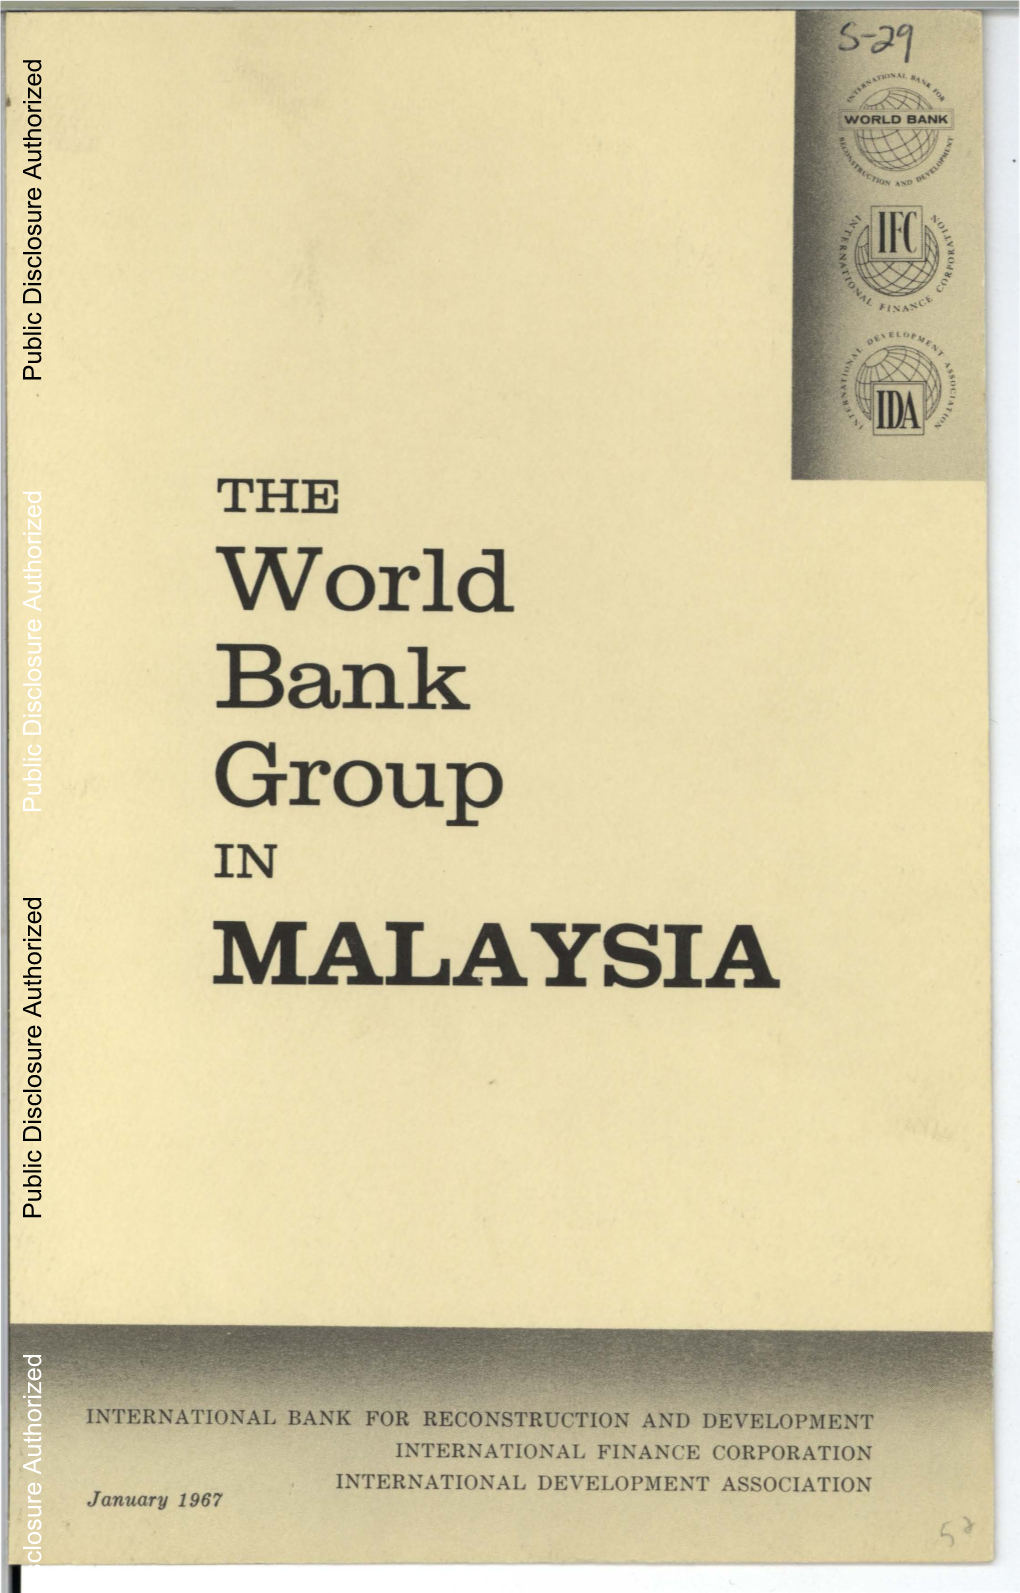 The World Bank Group in Malaysia